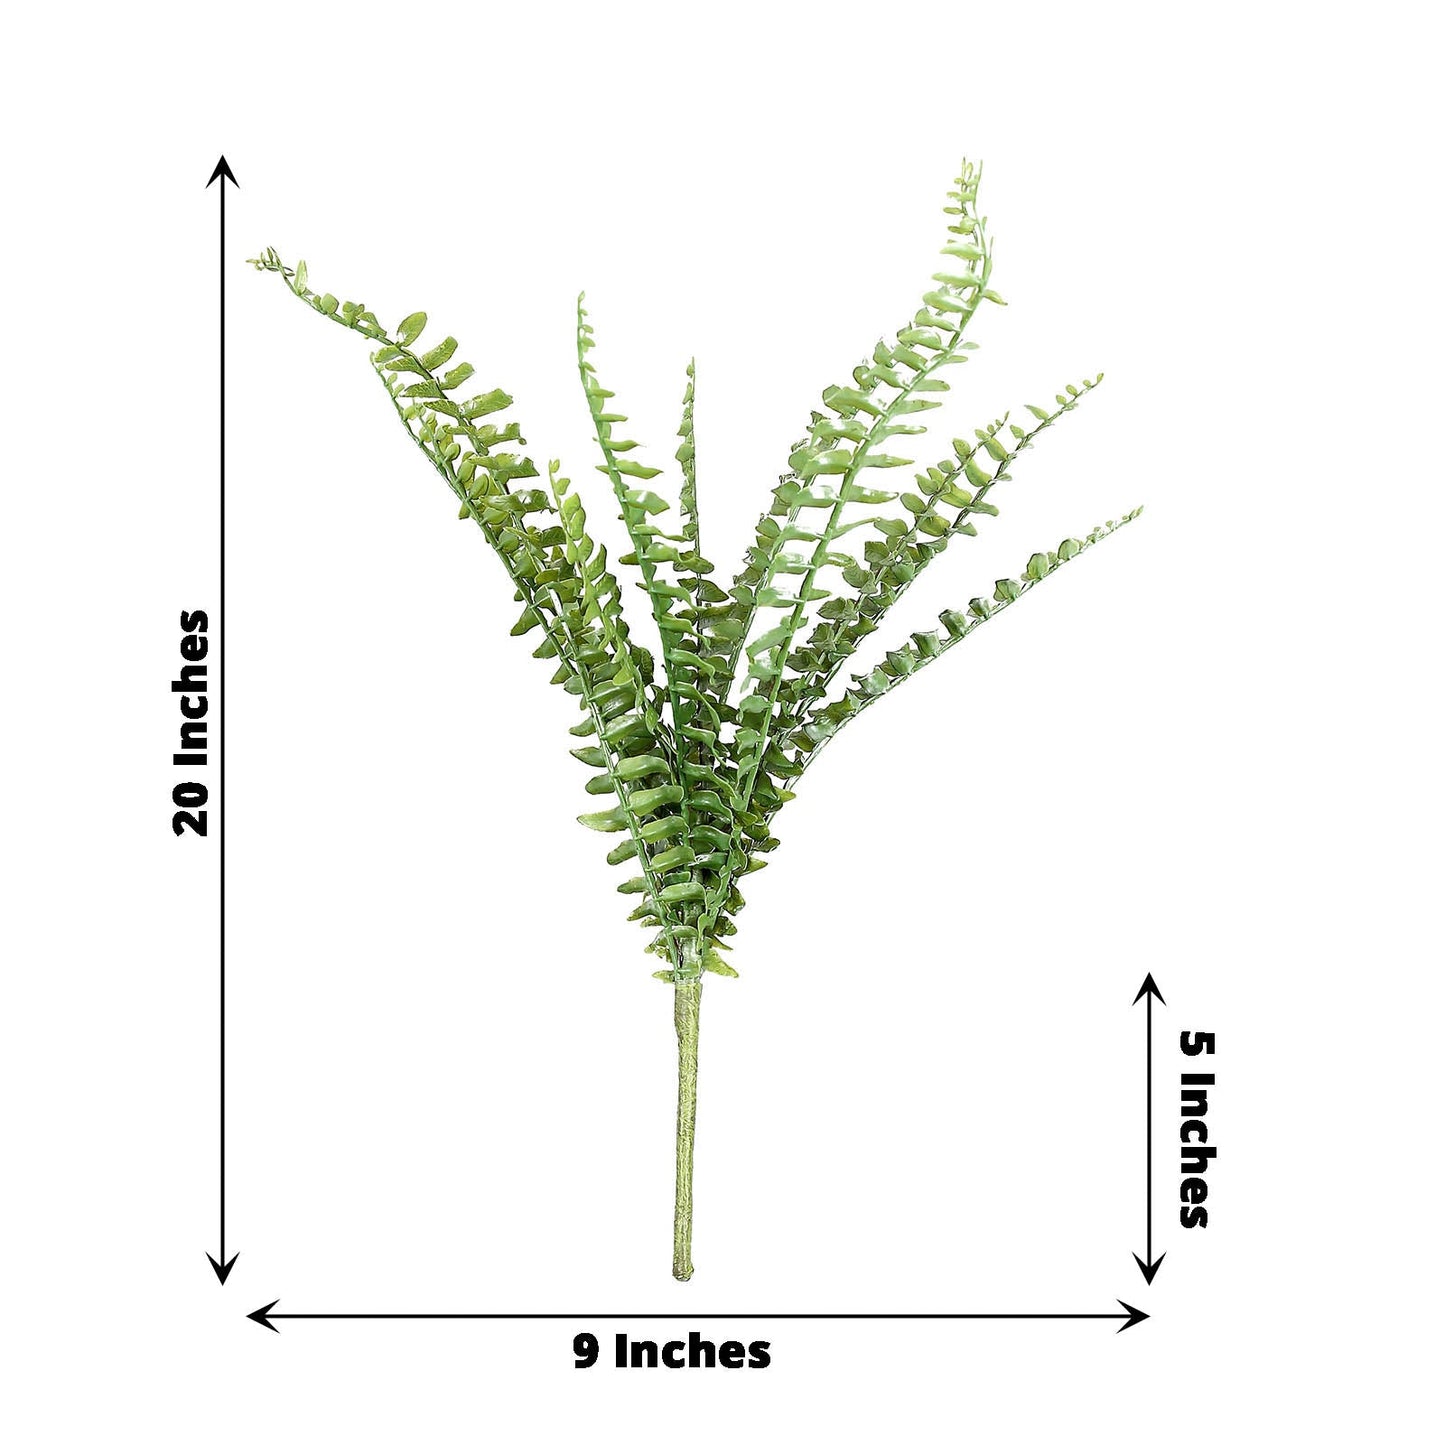 Artificial Boston Fern Green Leaf Plant, Premium Real Touch Indoor Spray 20"